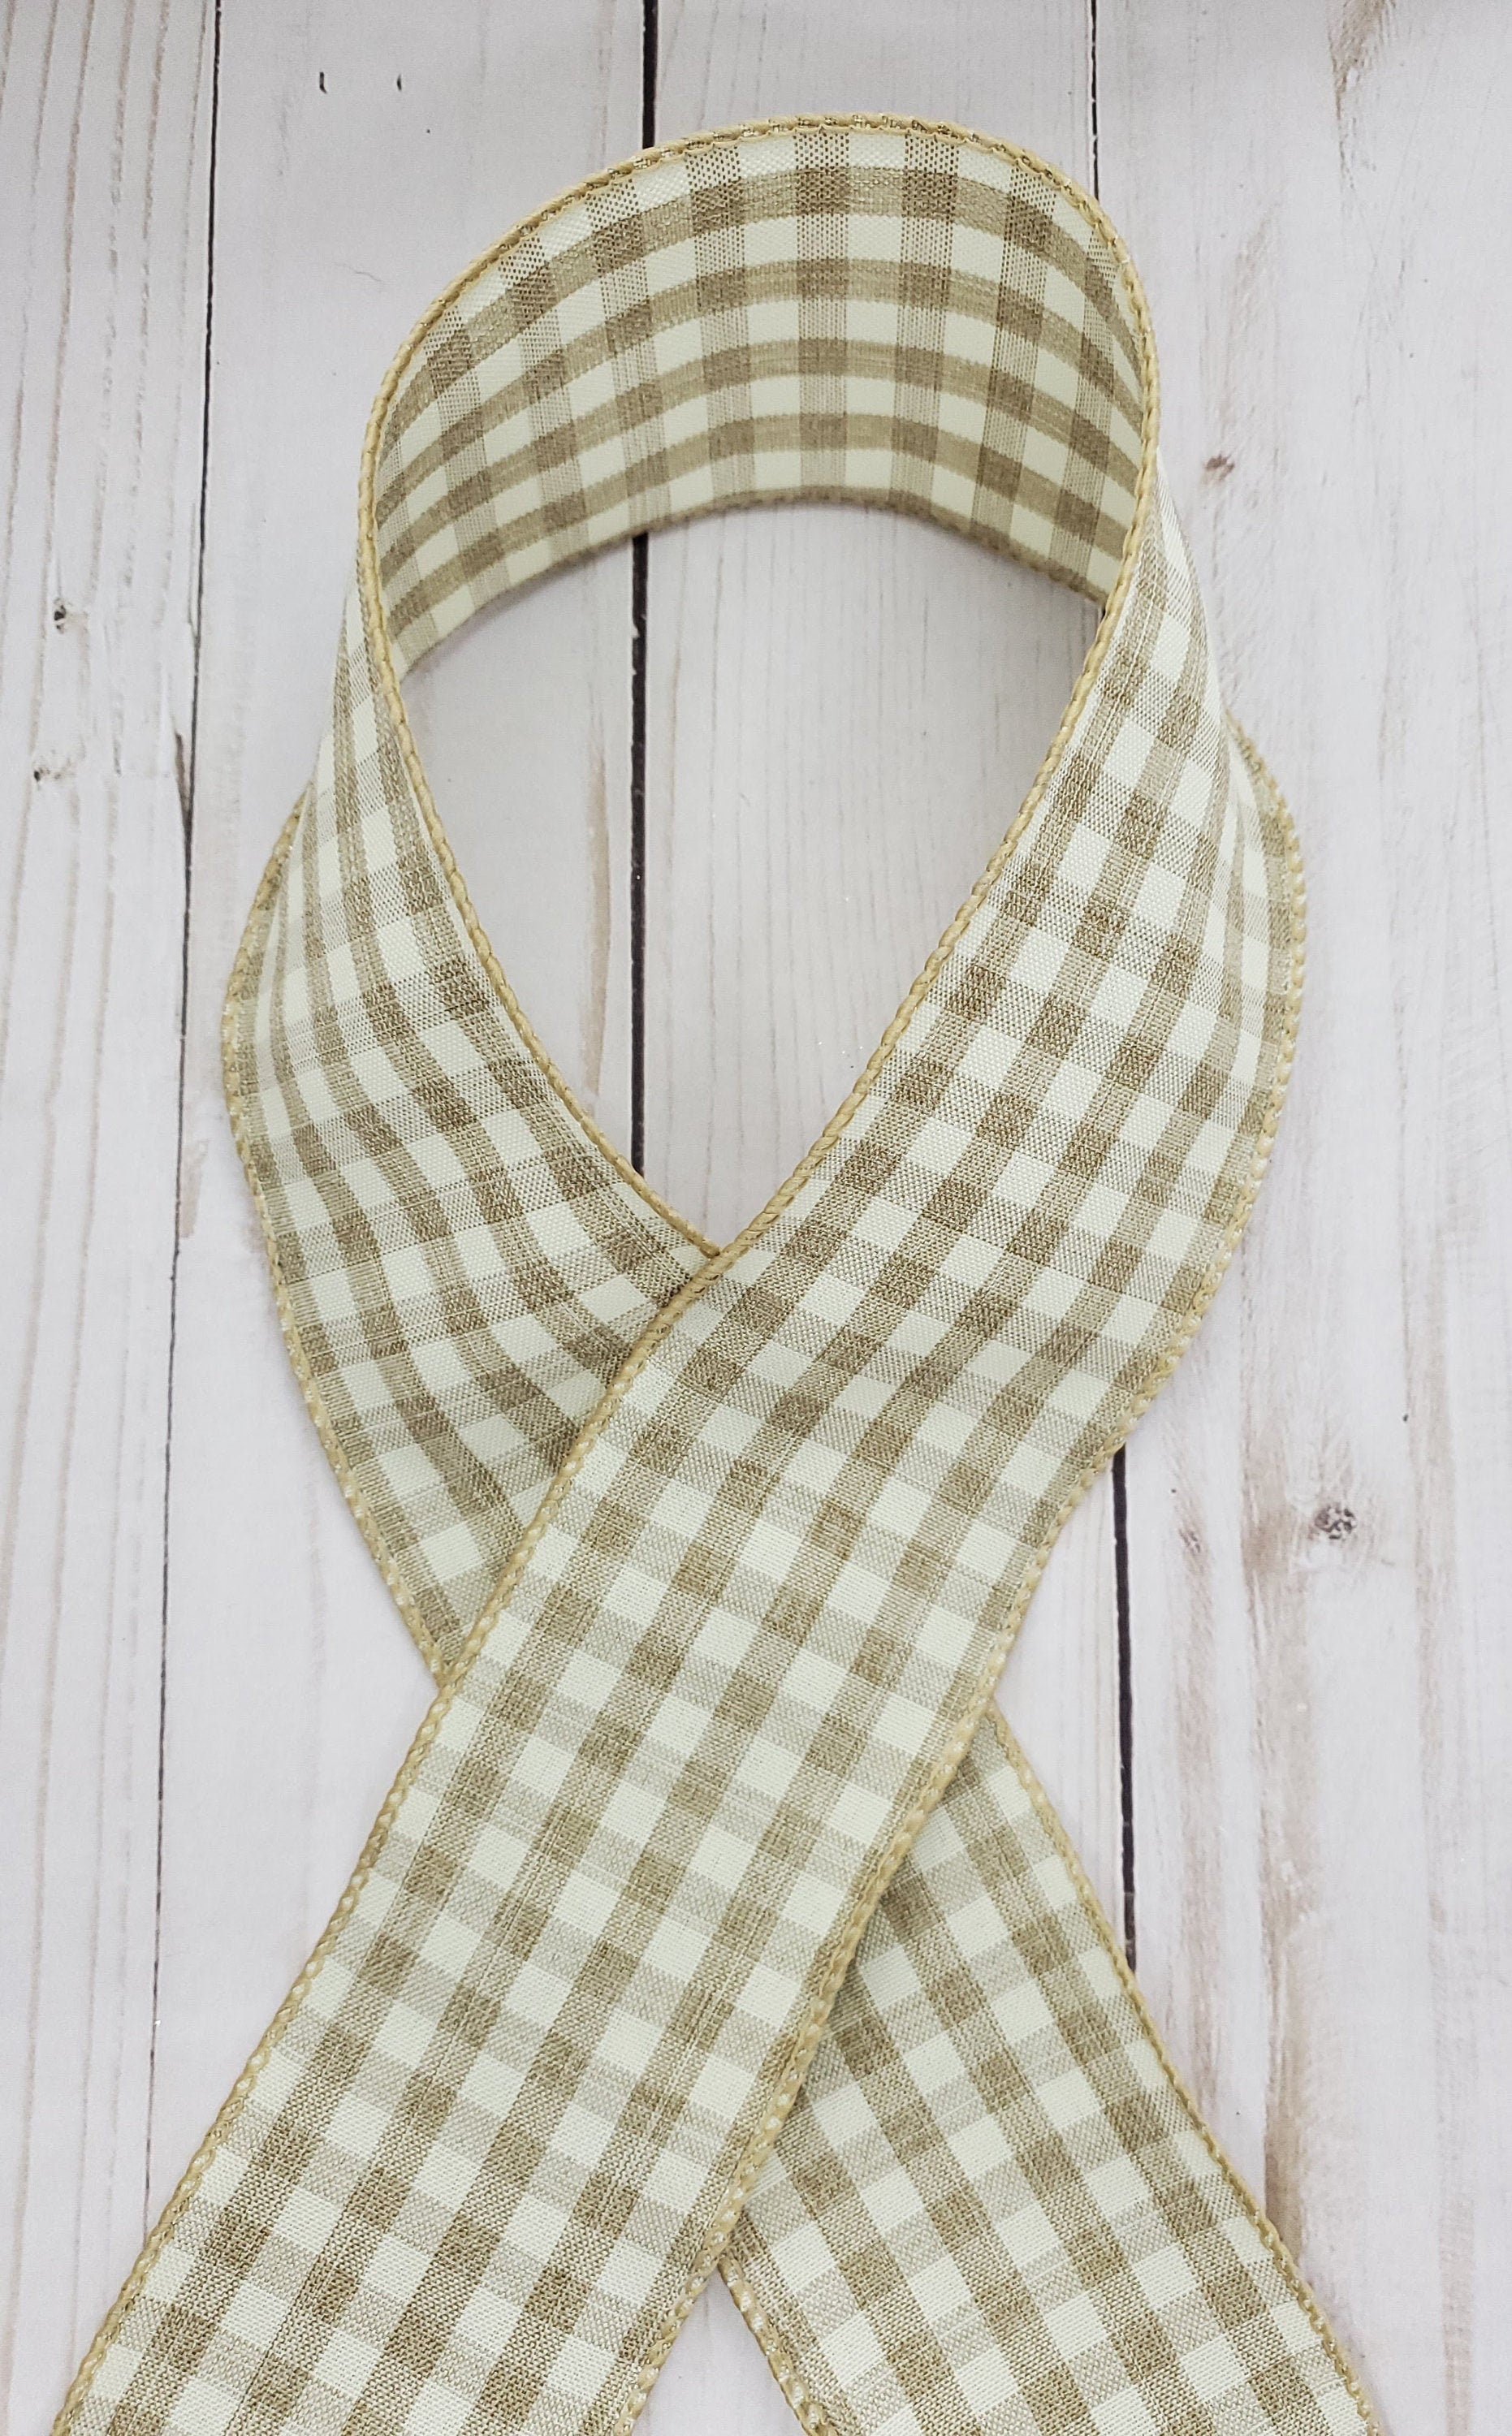 2.5 Woven Natural Gingham Ribbon, Wired Tan Cream Gingham Ribbon, Tan  Gingham Farmhouse Wired Ribbon